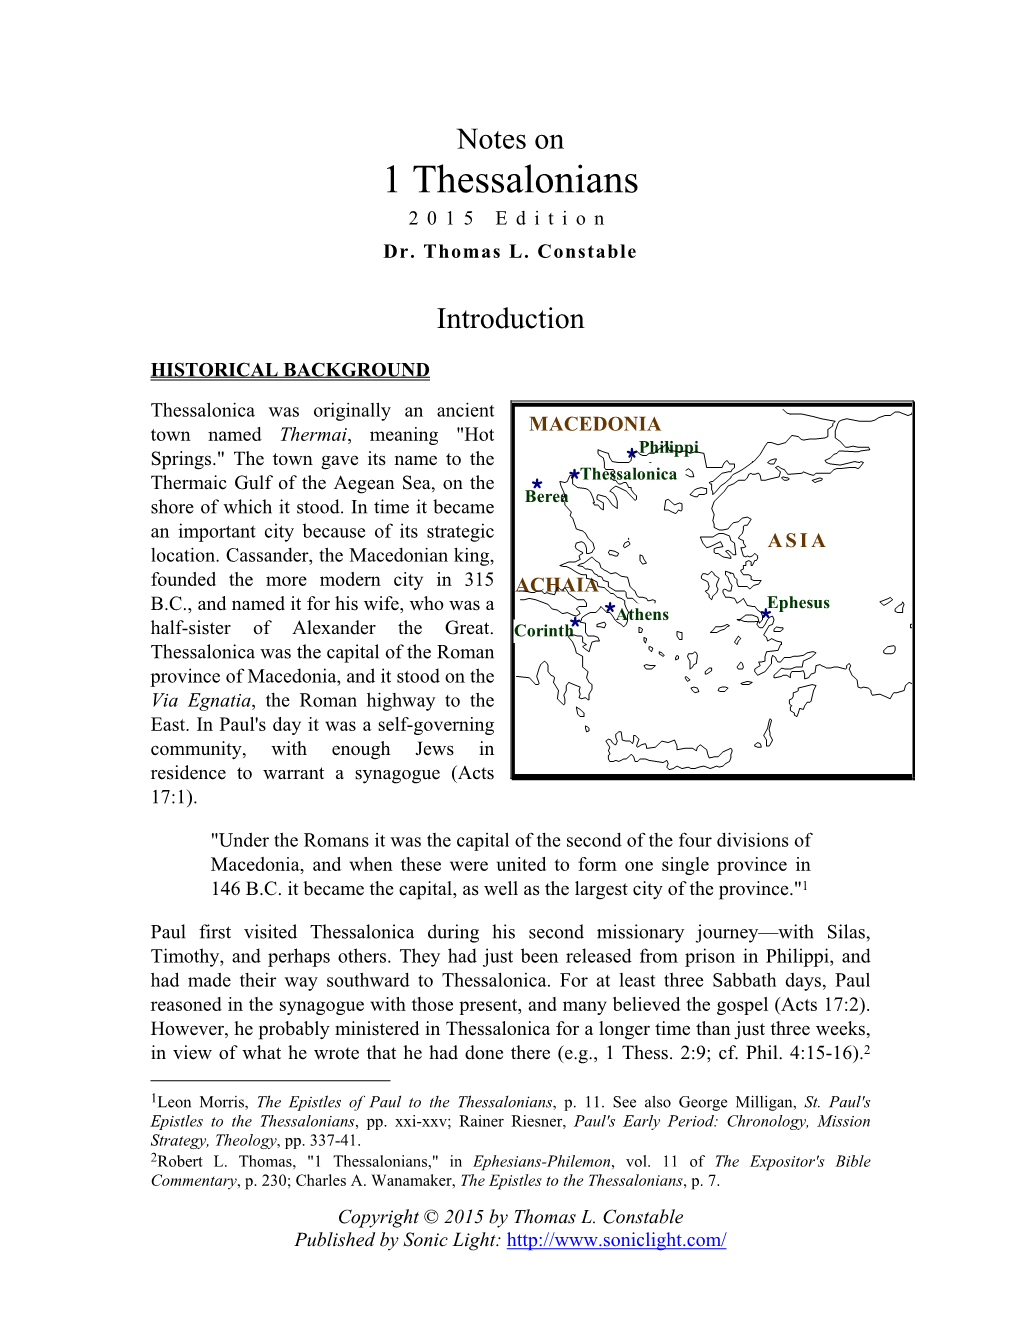 1 Thessalonians 2015 Edition Dr